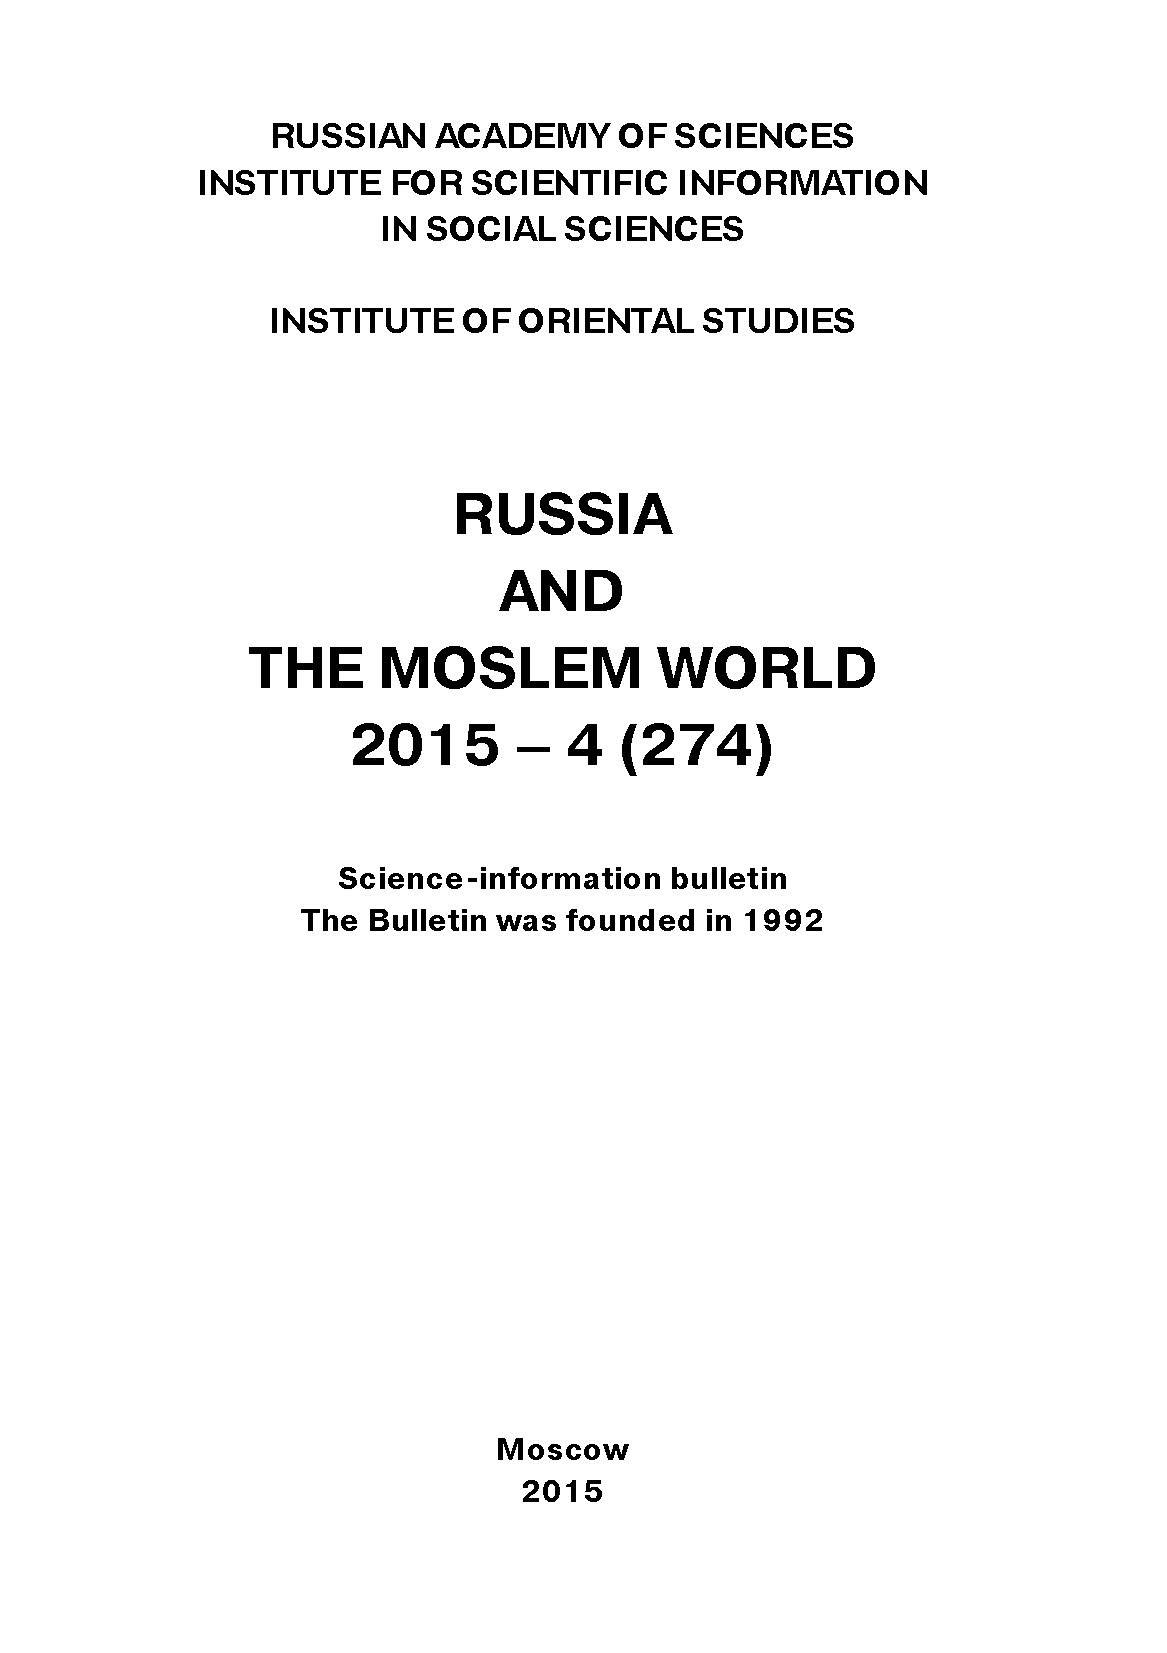 Russia and the Moslem World№ 04 / 2015